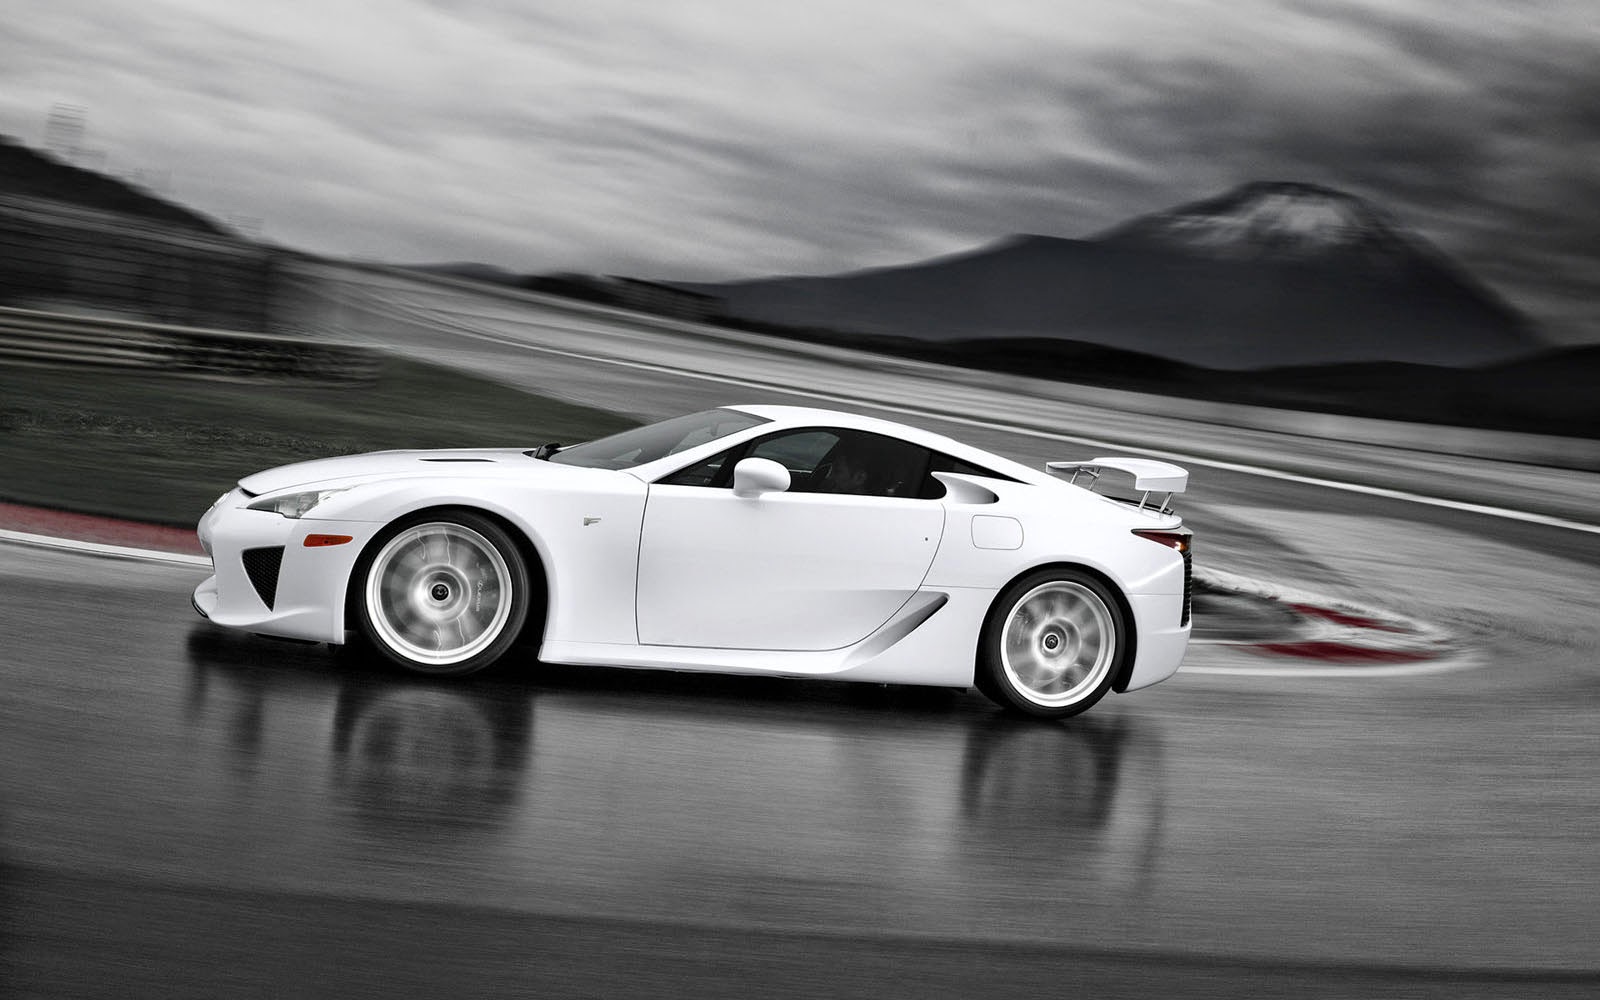 Tag Lexus Lfa Wallpaper Background Photos Image Andpictures For